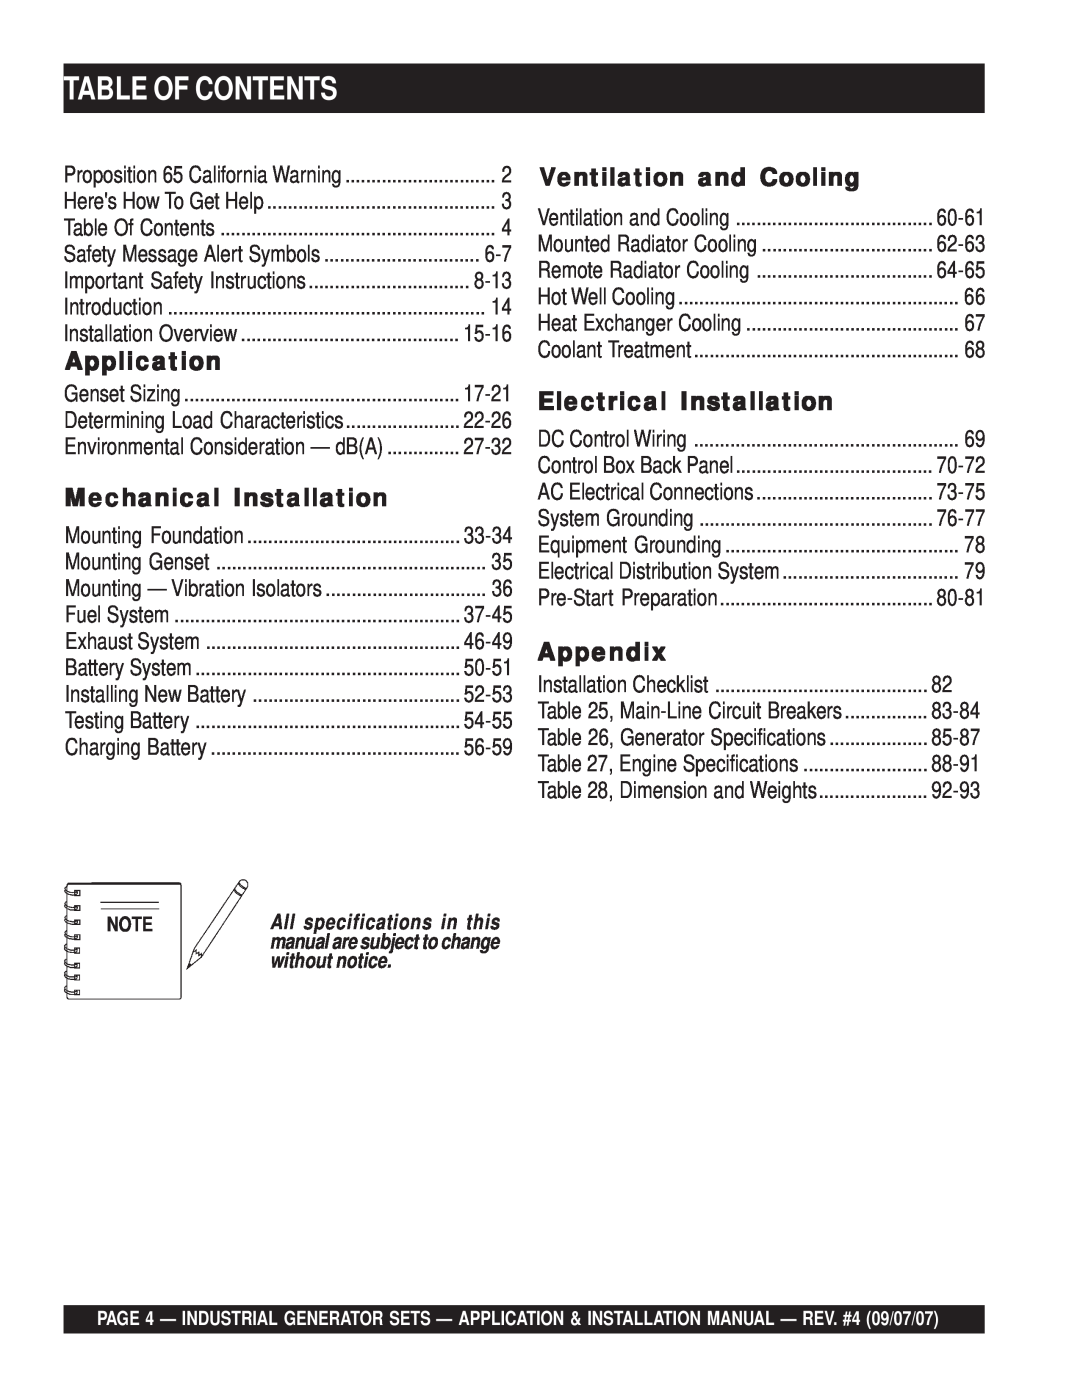 Multiquip MQP50IZ Table Of Contents, Application, Mechanical Installation, Ventilation and Cooling, Appendix, 8-13 